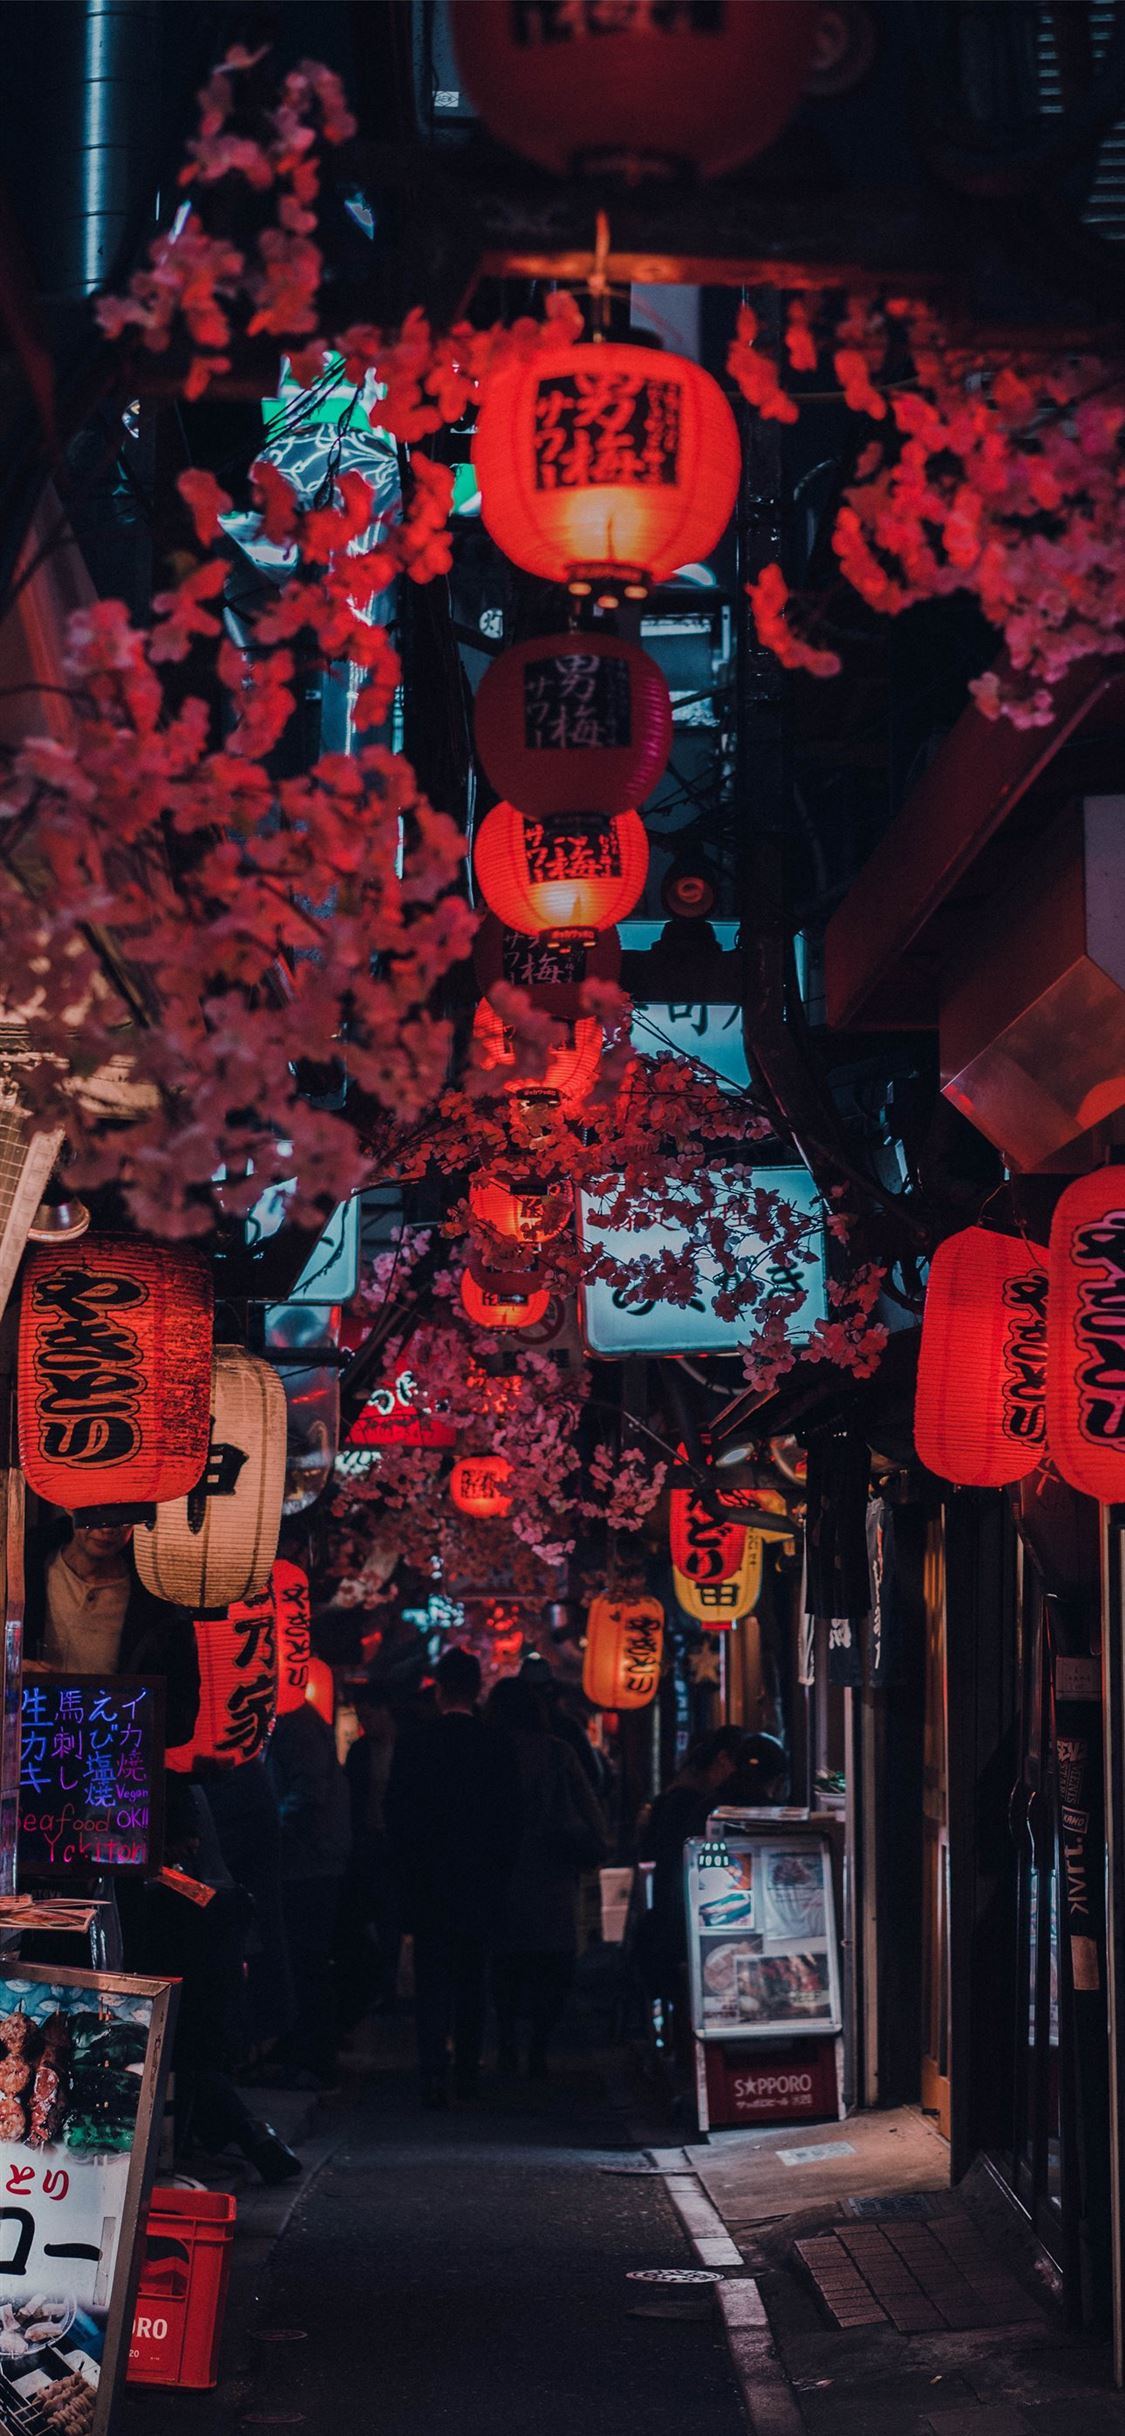 people walking on street with red lanterns iPhone wallpaper 